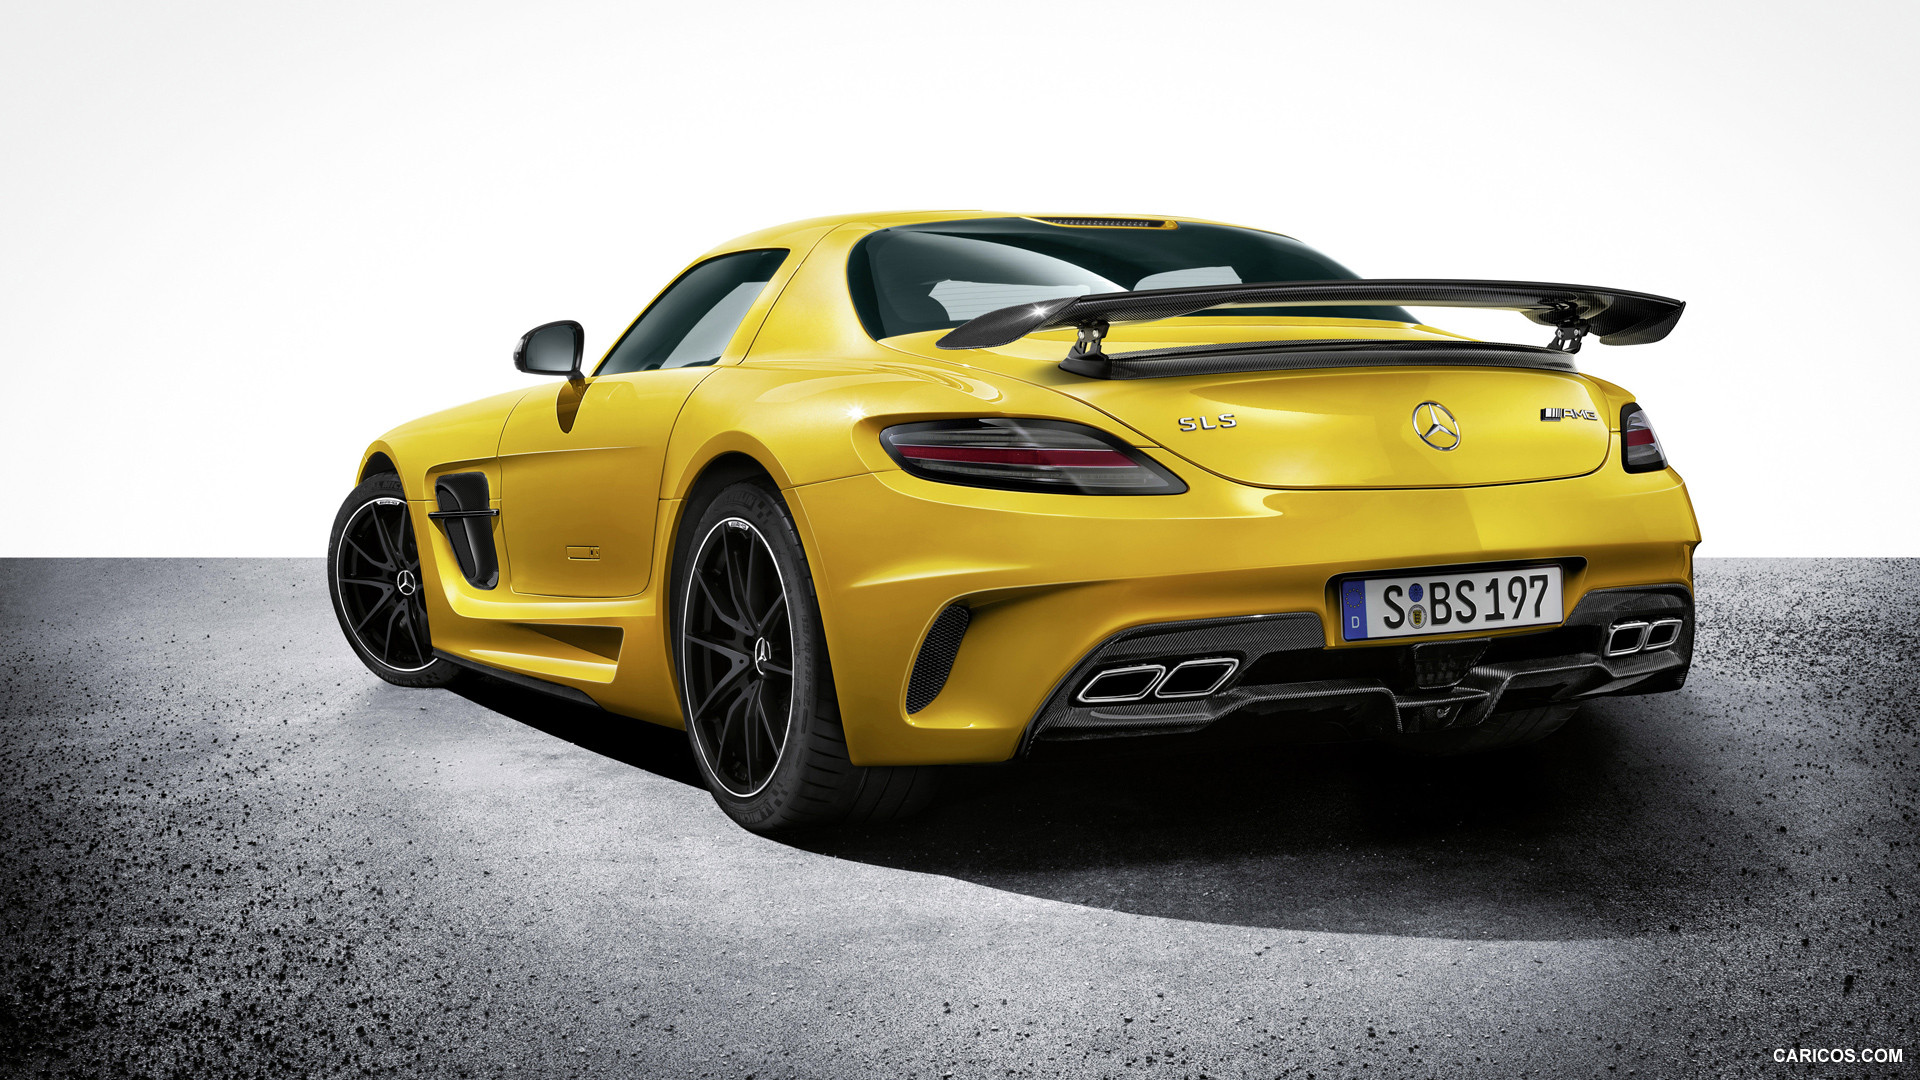 2014 Mercedes-Benz SLS AMG Coupe Black Series Solarbeam - Rear, #15 of 40